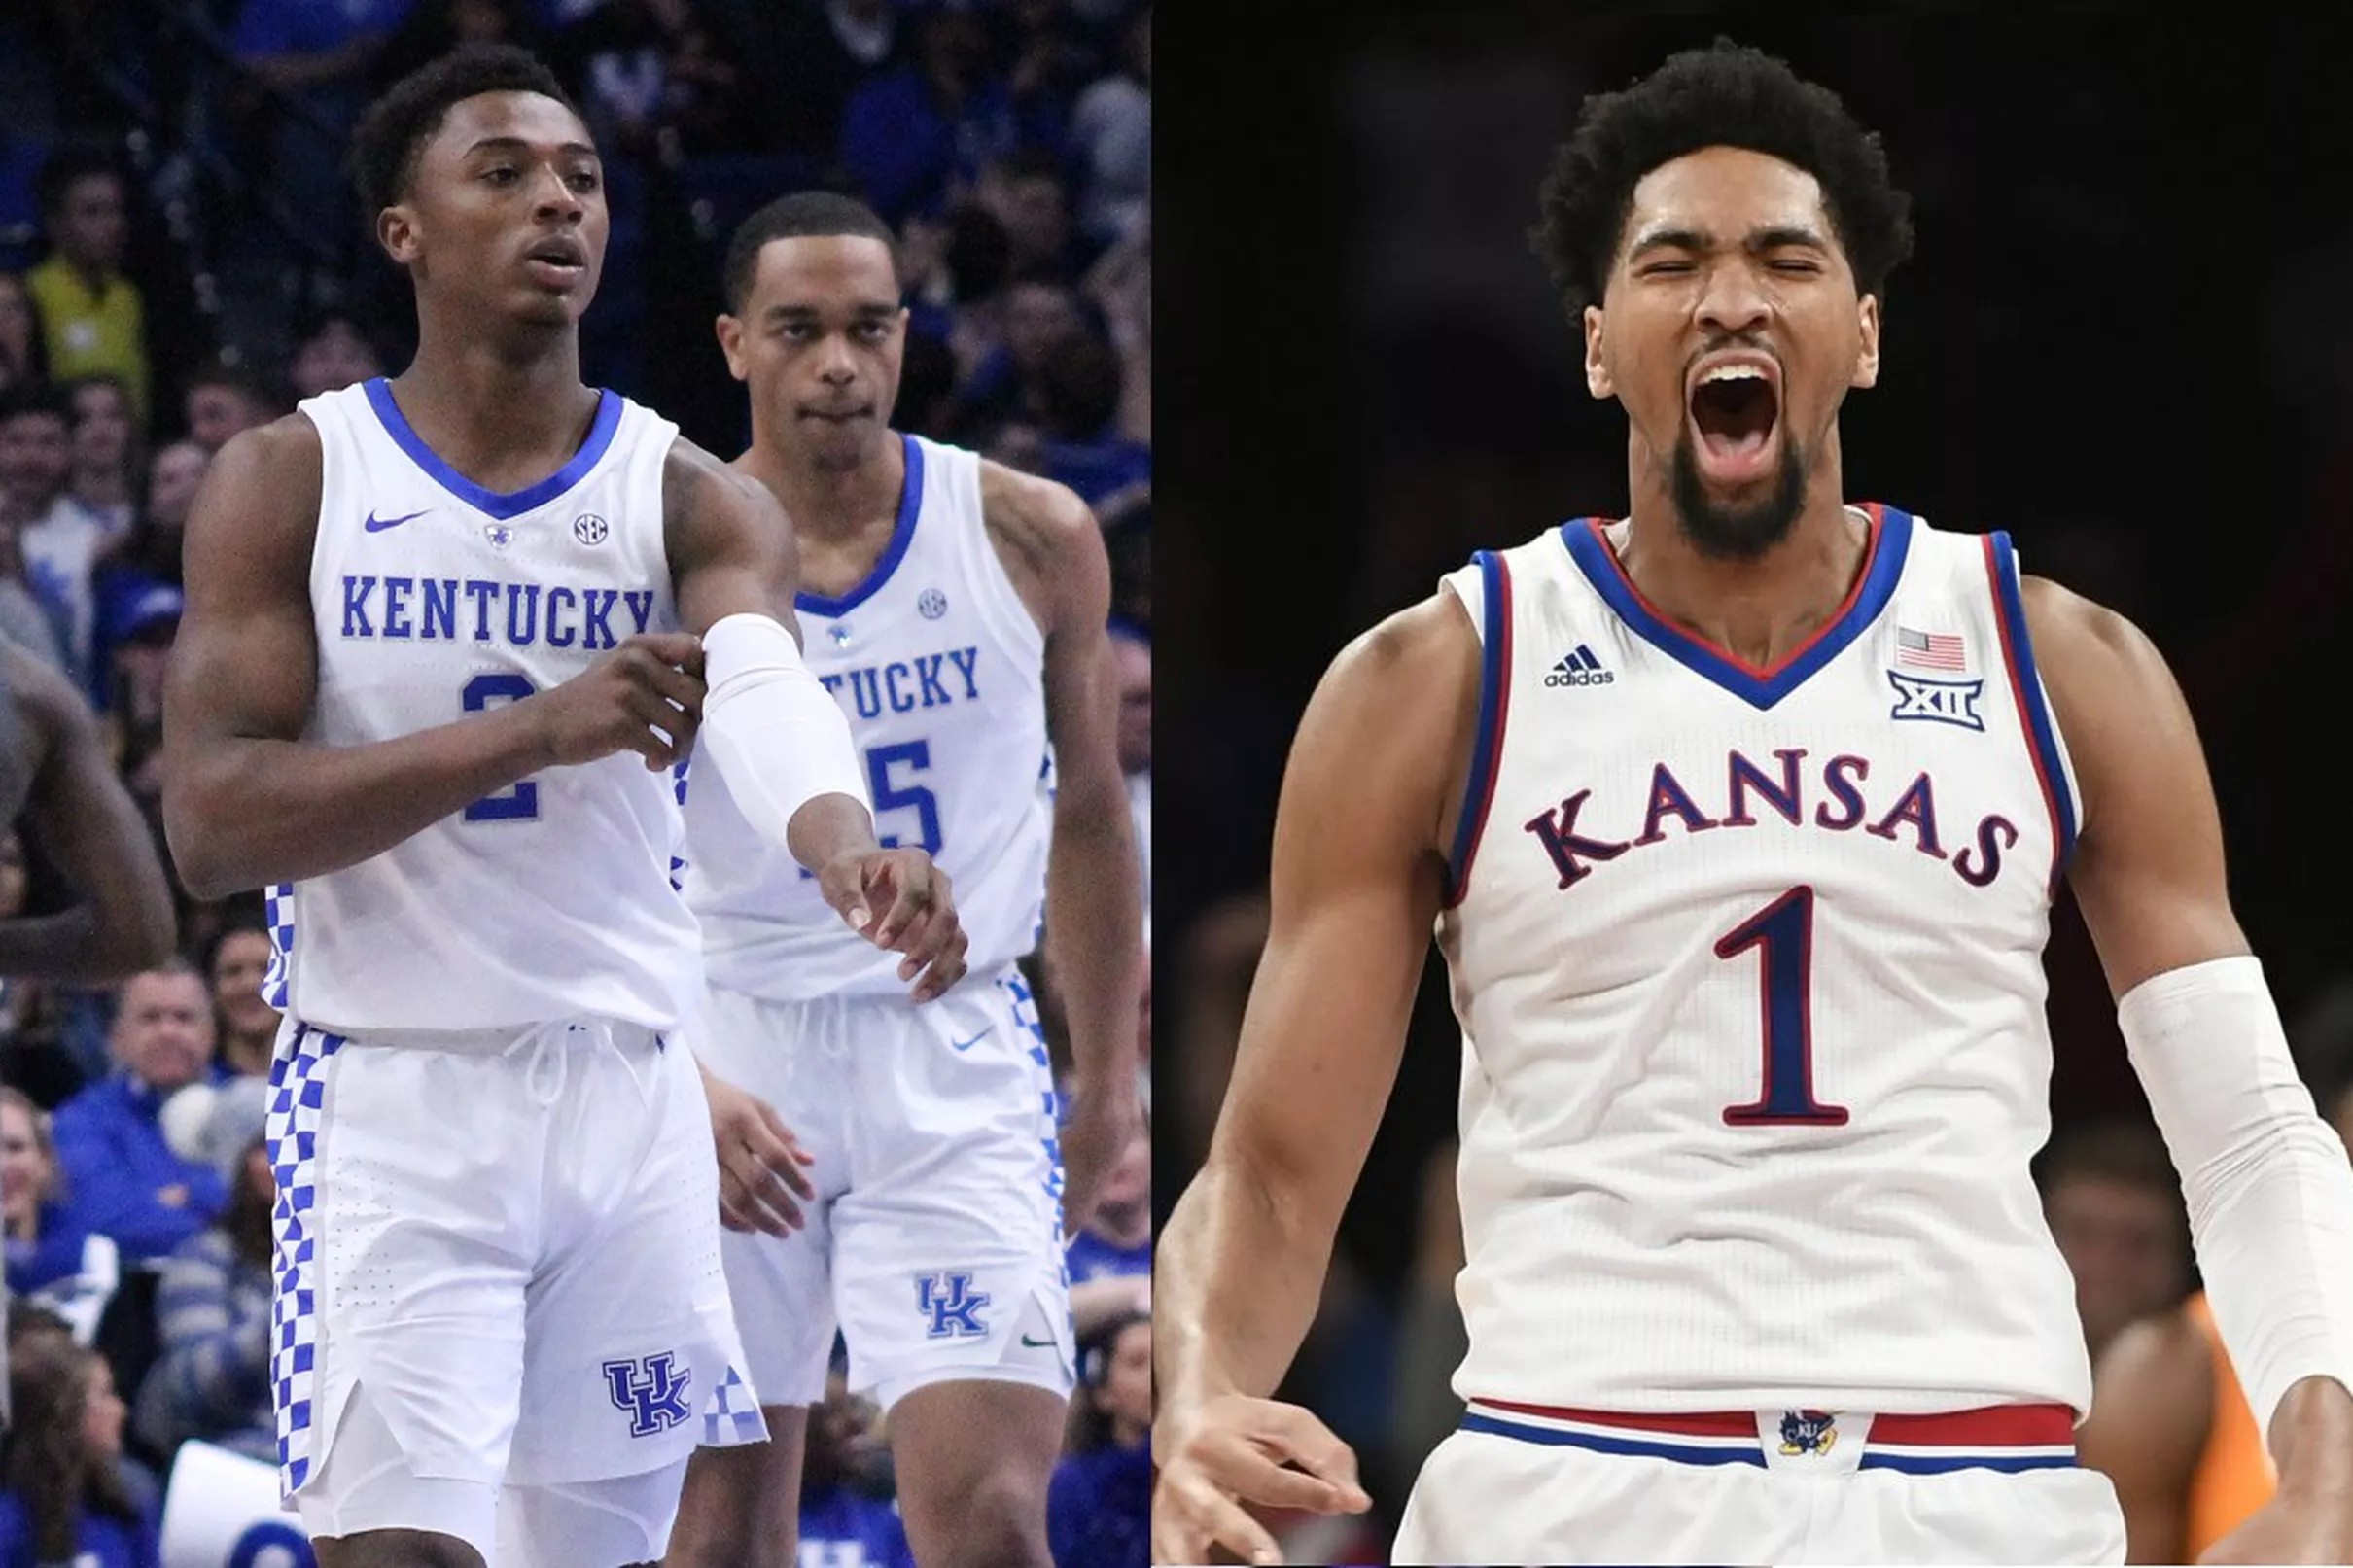 Kentucky vs. Kansas Preview, viewing info and what to watch for